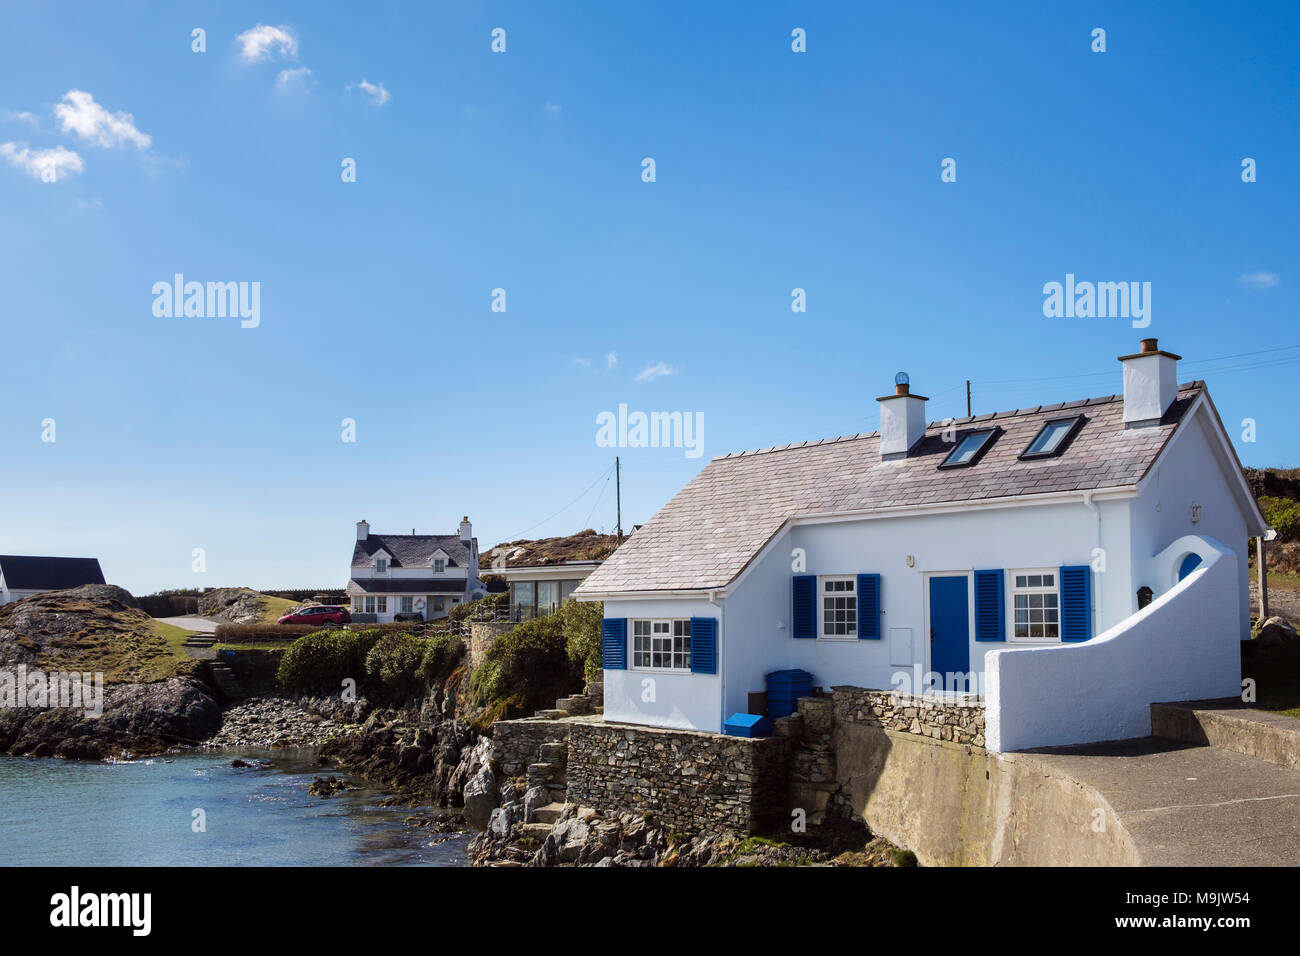 Quaint traditional old Welsh white cottage overlooking a rocky cove in small village. Rhoscolyn Holy Island Isle of Anglesey Wales UK Britain Stock Photo